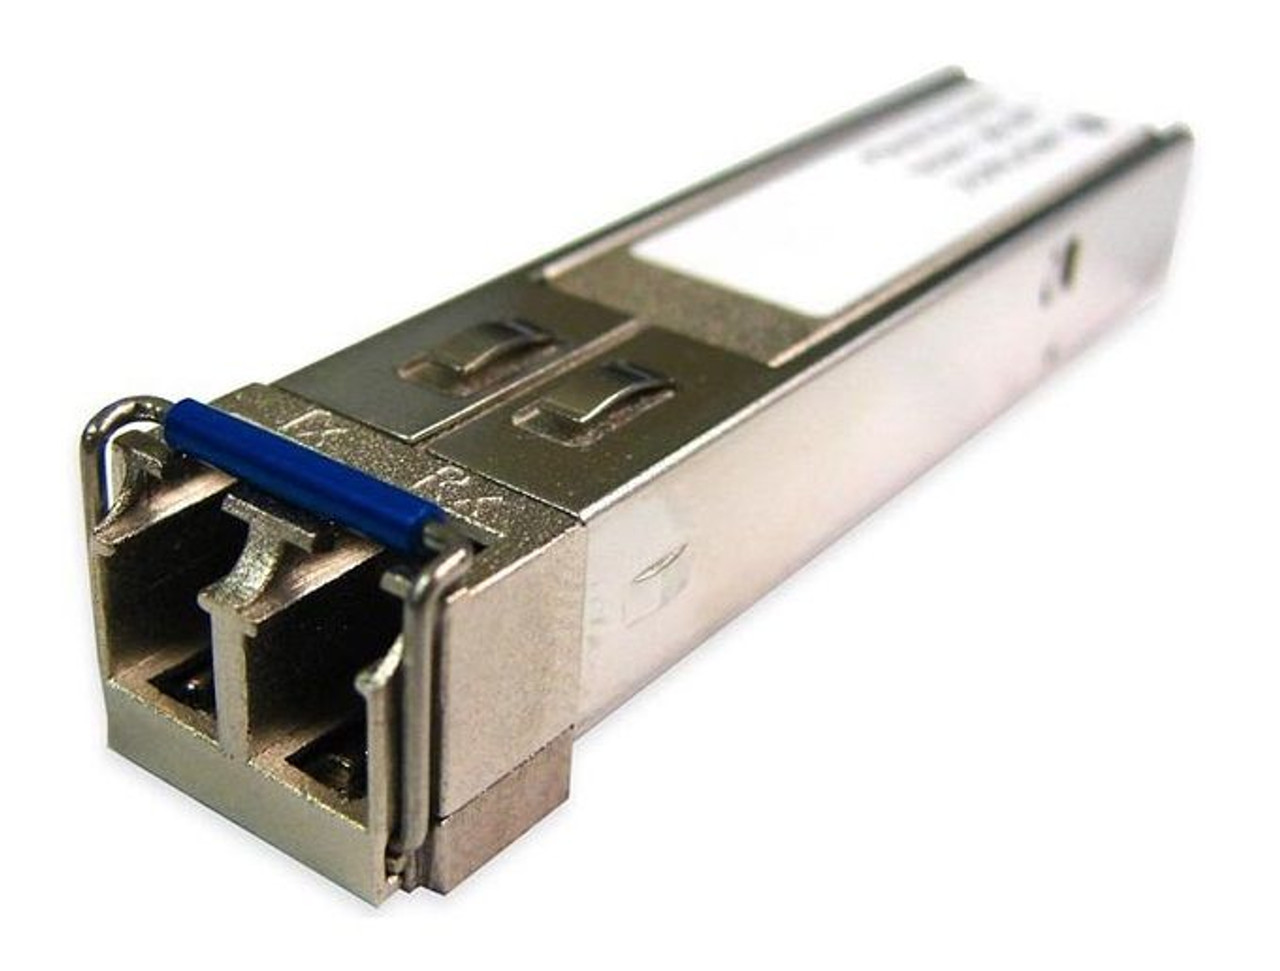 10052H | EXTREME NETWORKS |Extreme 1Gbps 1000Base-Lx Single-Mode Fiber 10Km 1310Nm Duplex Lc ConNECtor Sfp (Mini-Gbic) Transceiver Module